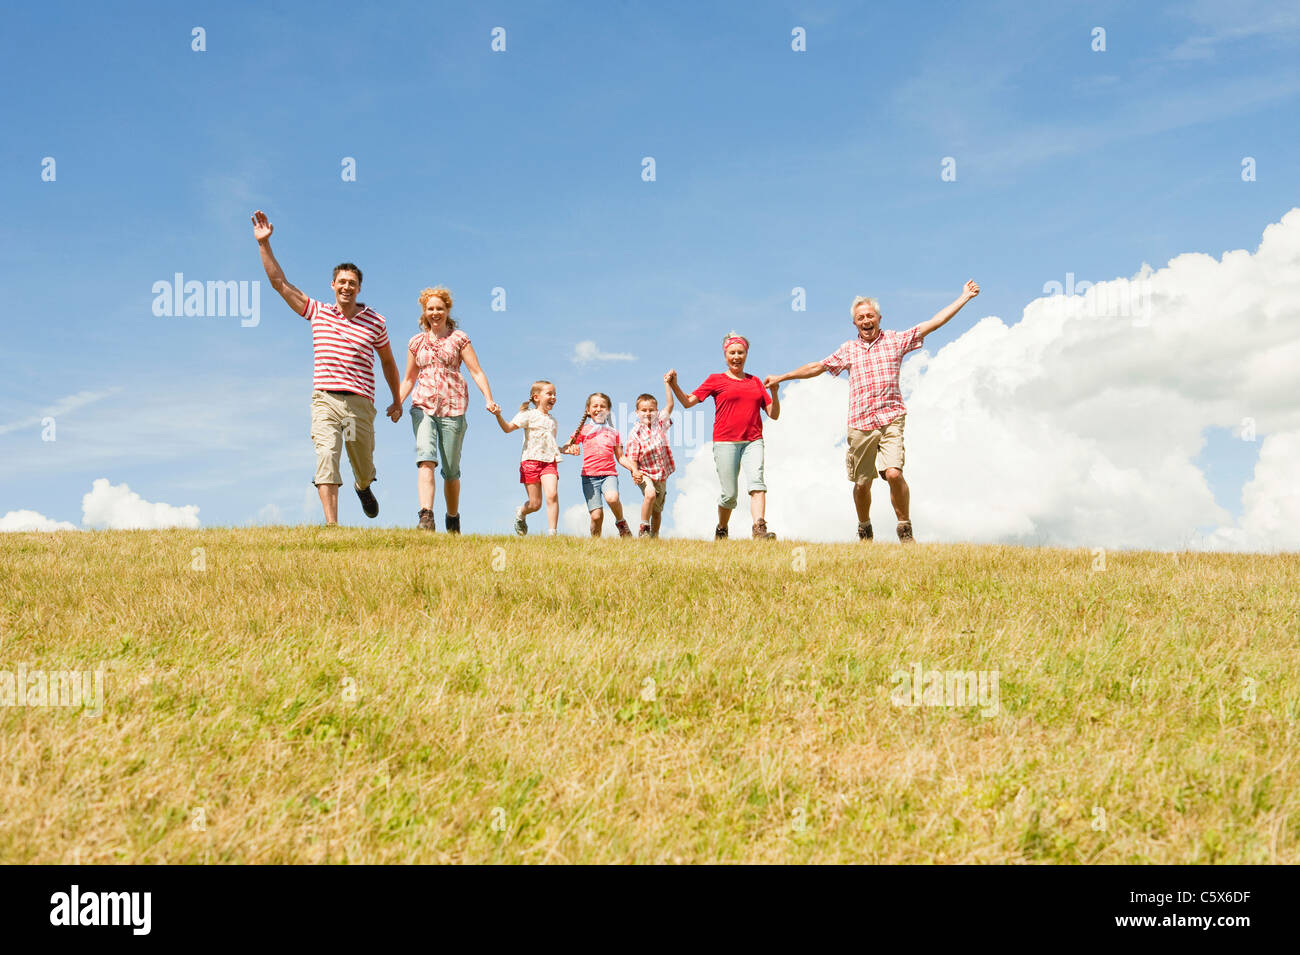 Allemagne, Berlin, Family walking in field, encourageant Banque D'Images